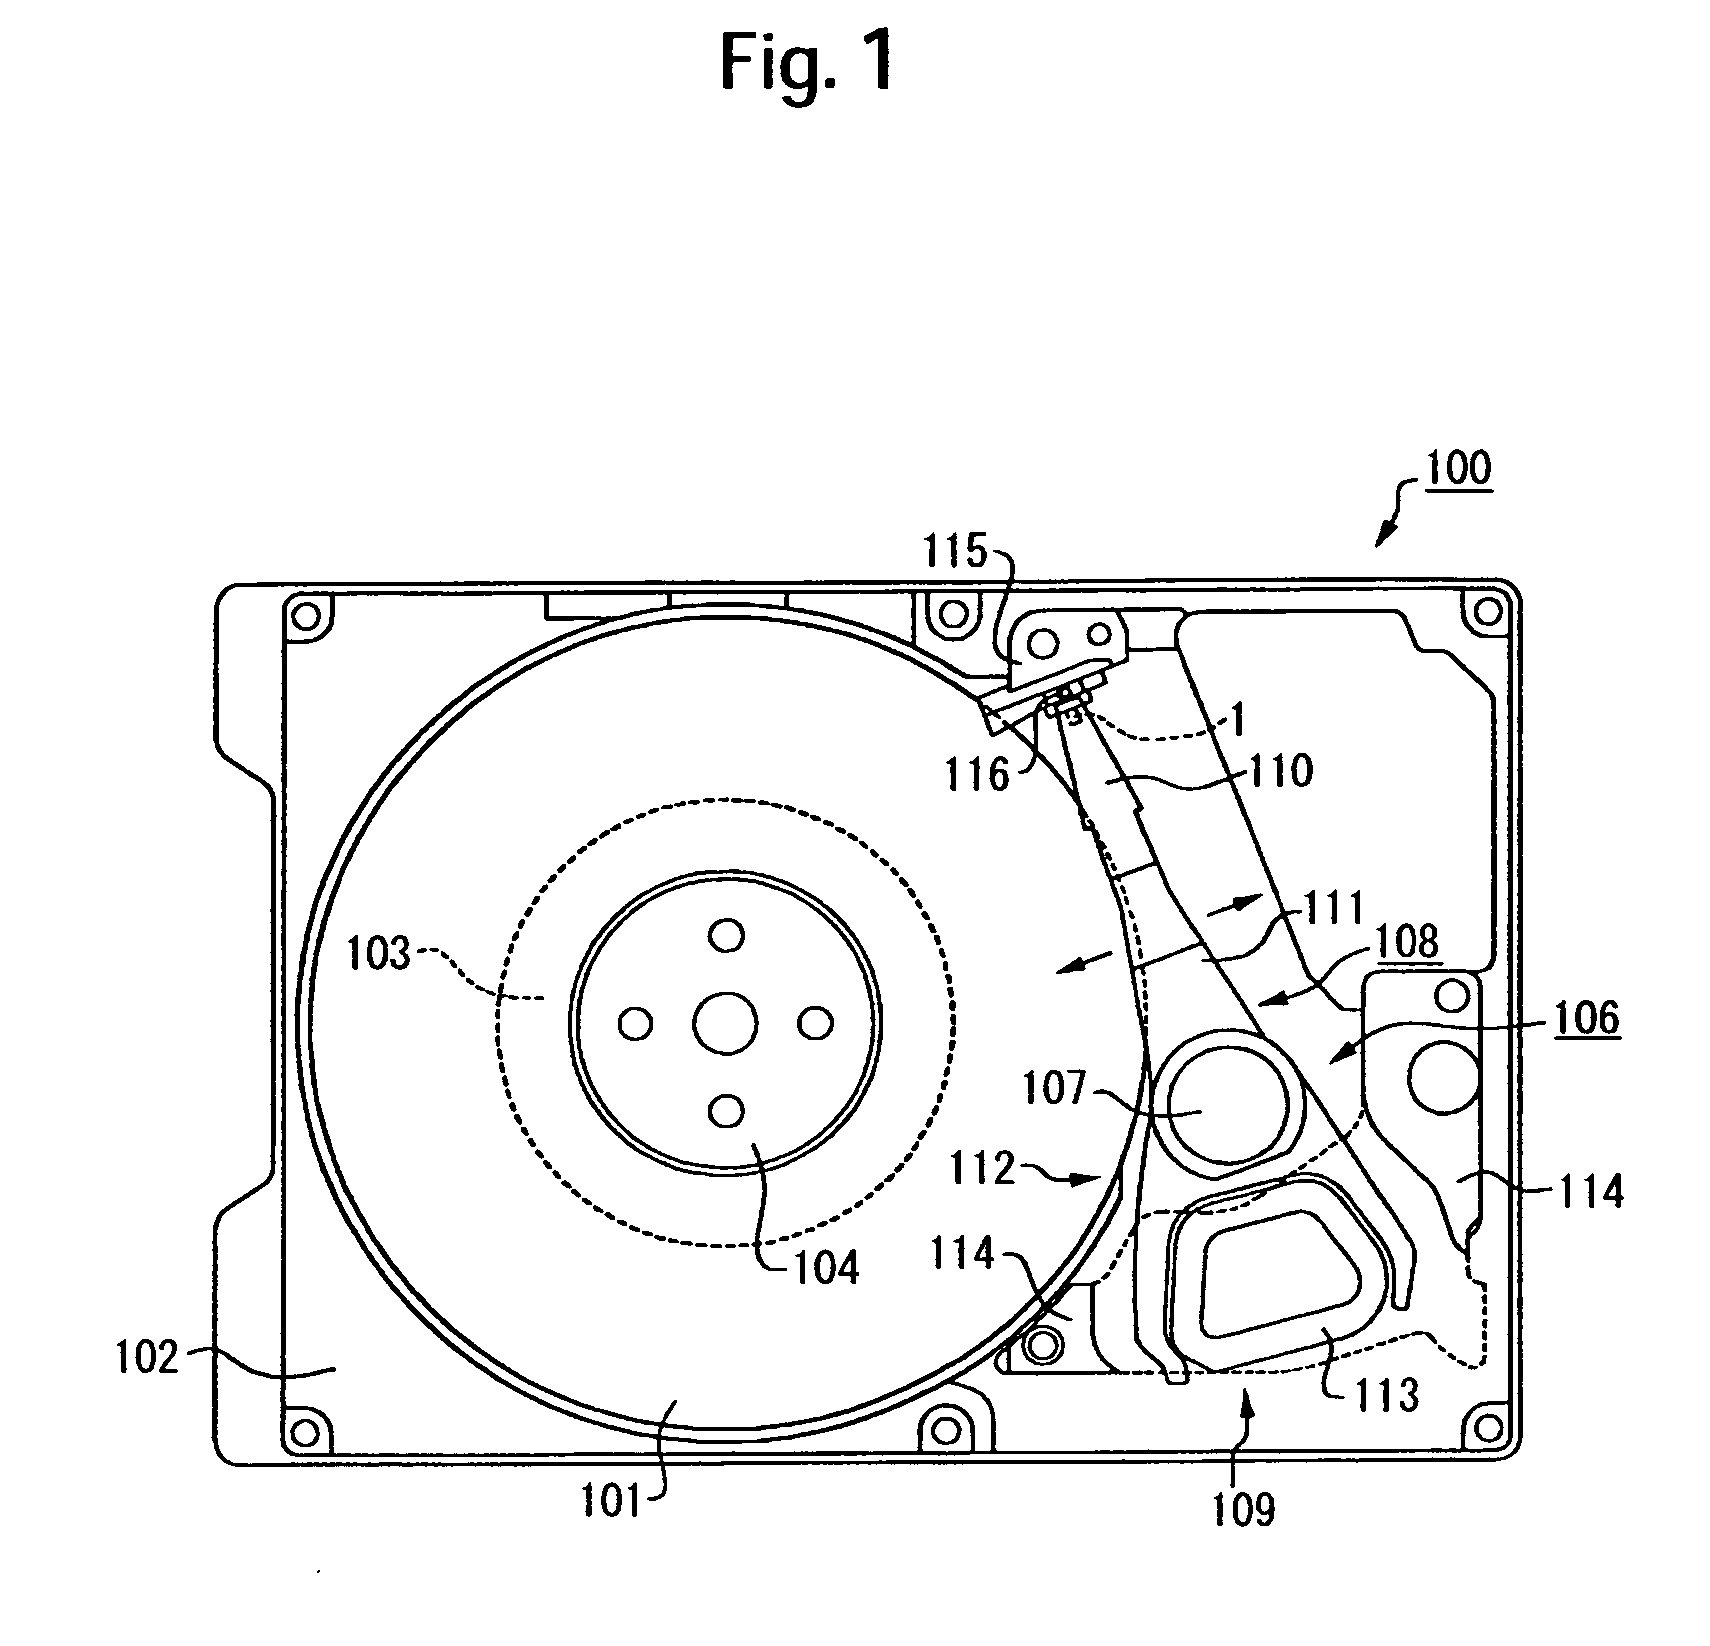 Magnetic disk drive with air bearing surface design for data area expansion